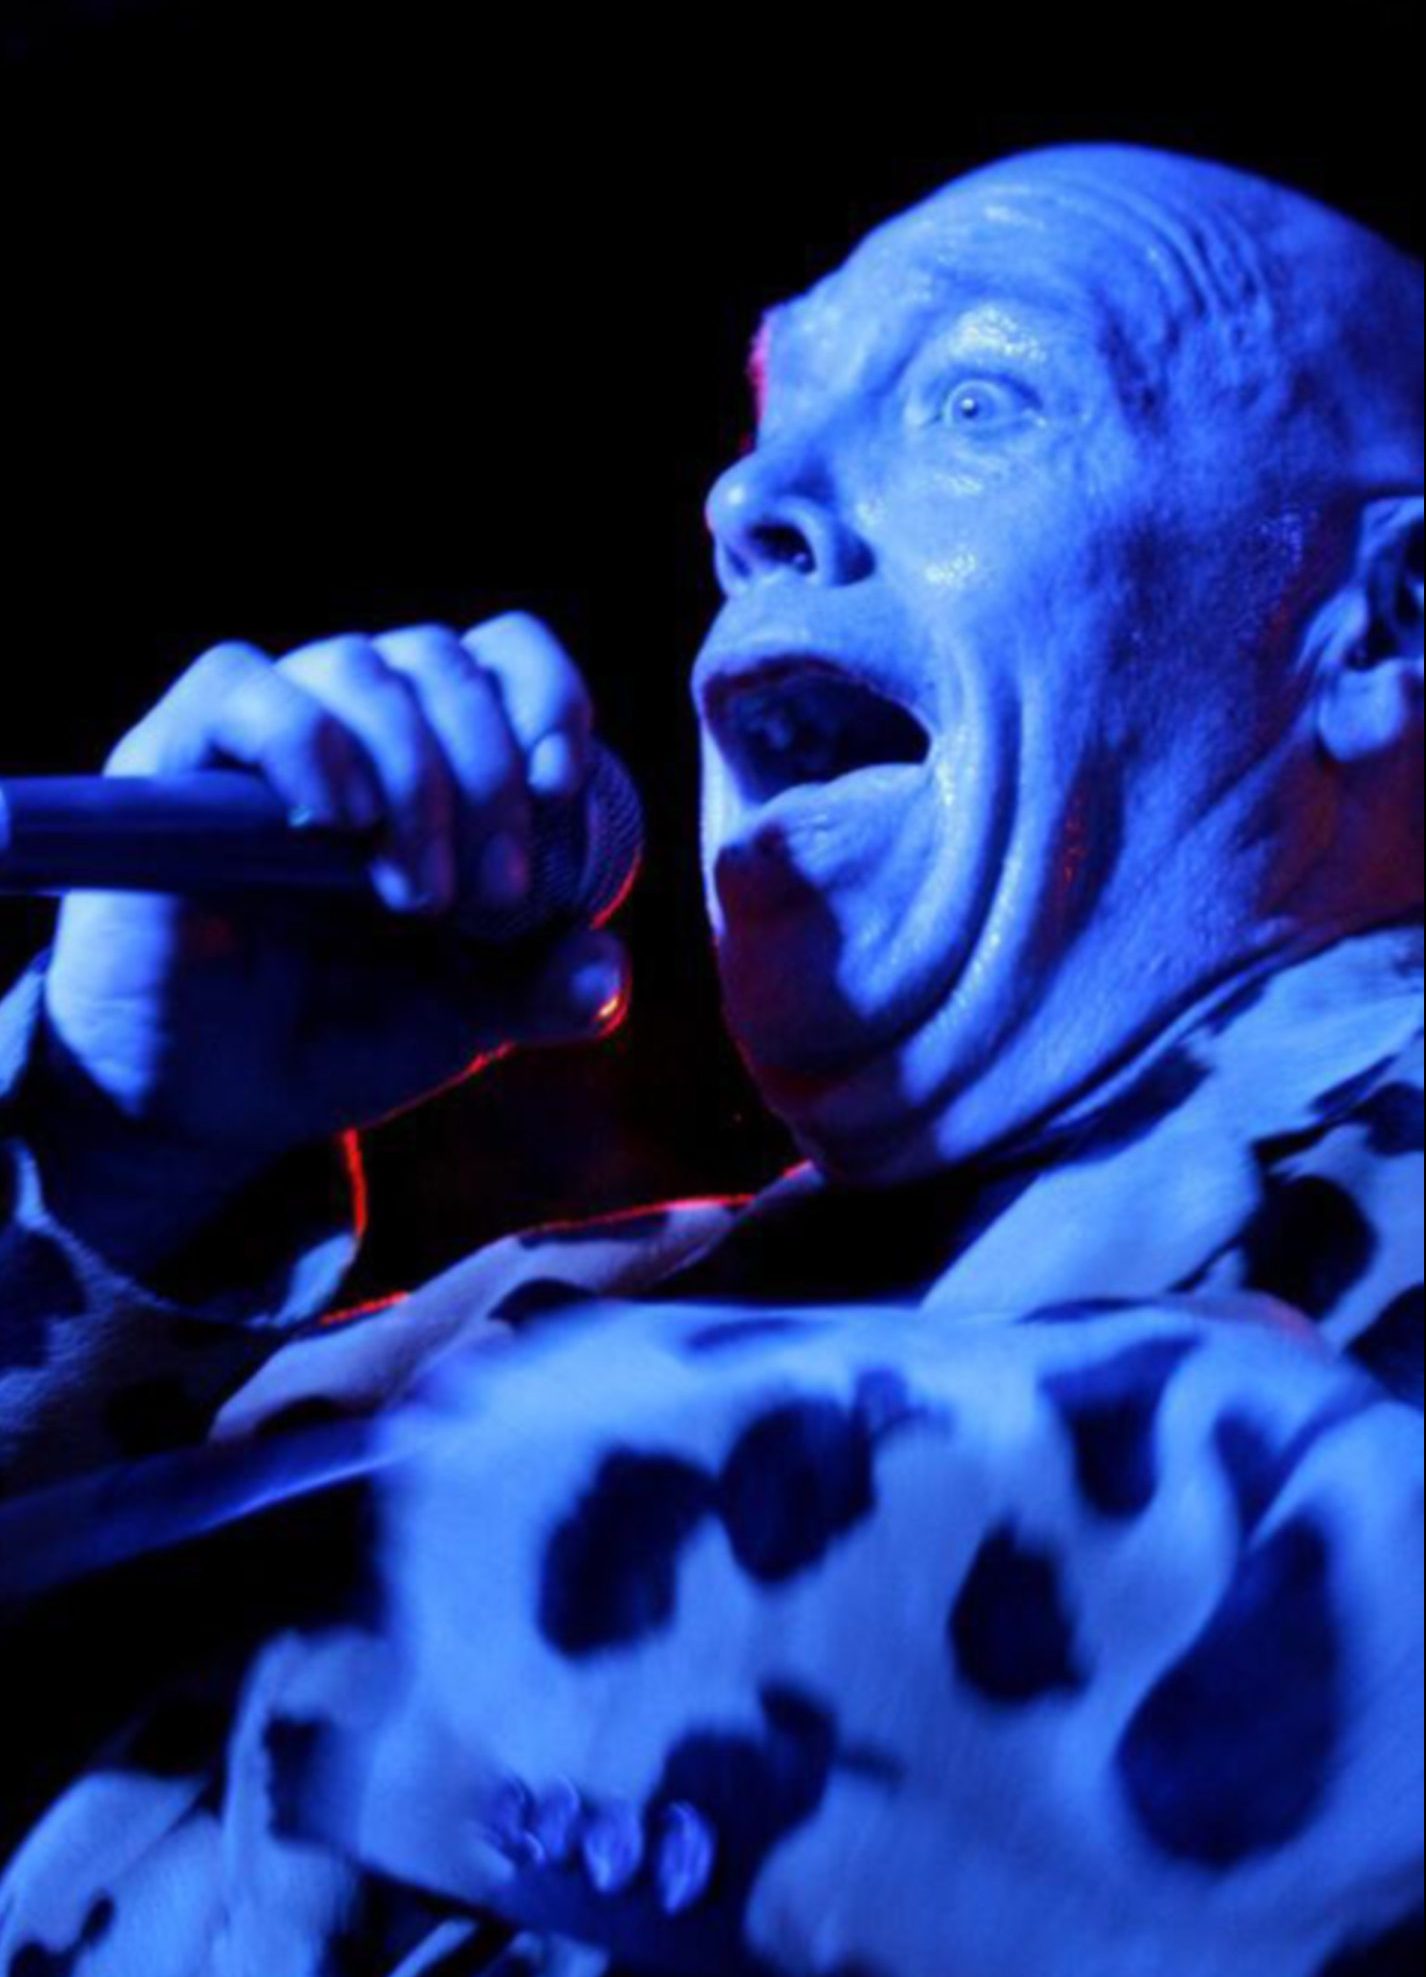 Buster Bloodvessel sings into the mic